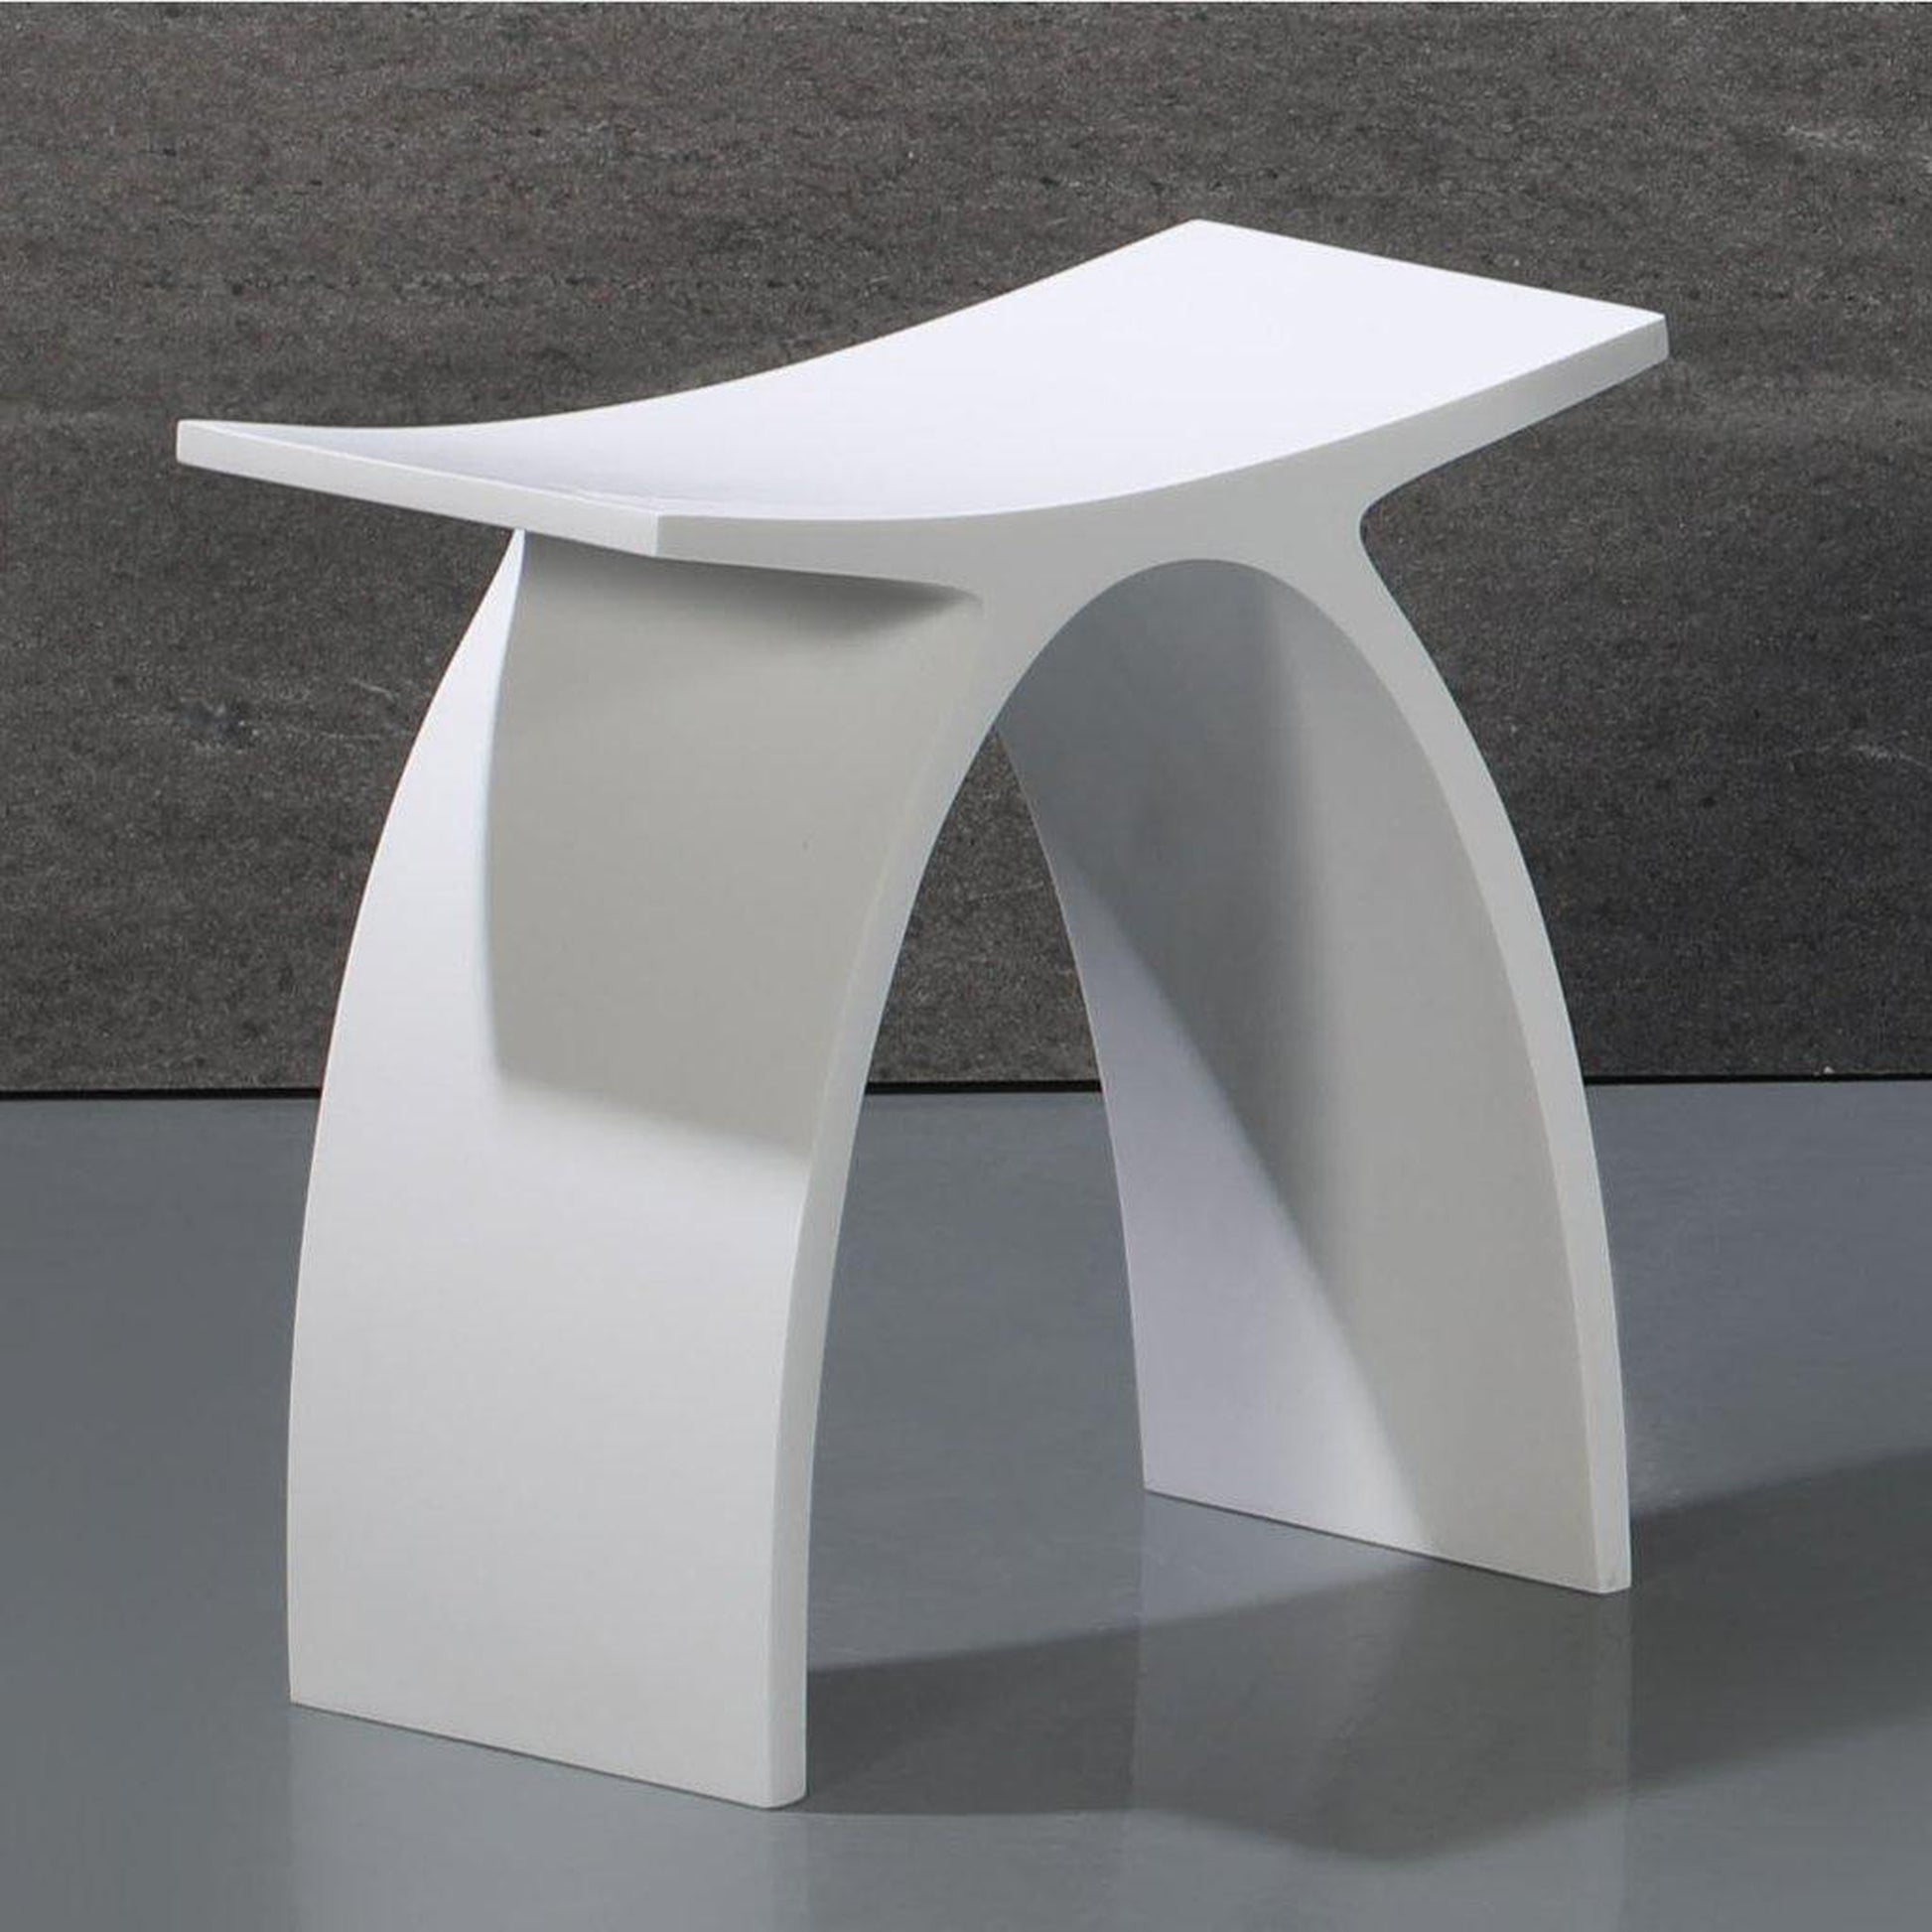 ALFI Brand ABST77 White Arched Matte Solid Surface Resin Bathroom/Shower Stool